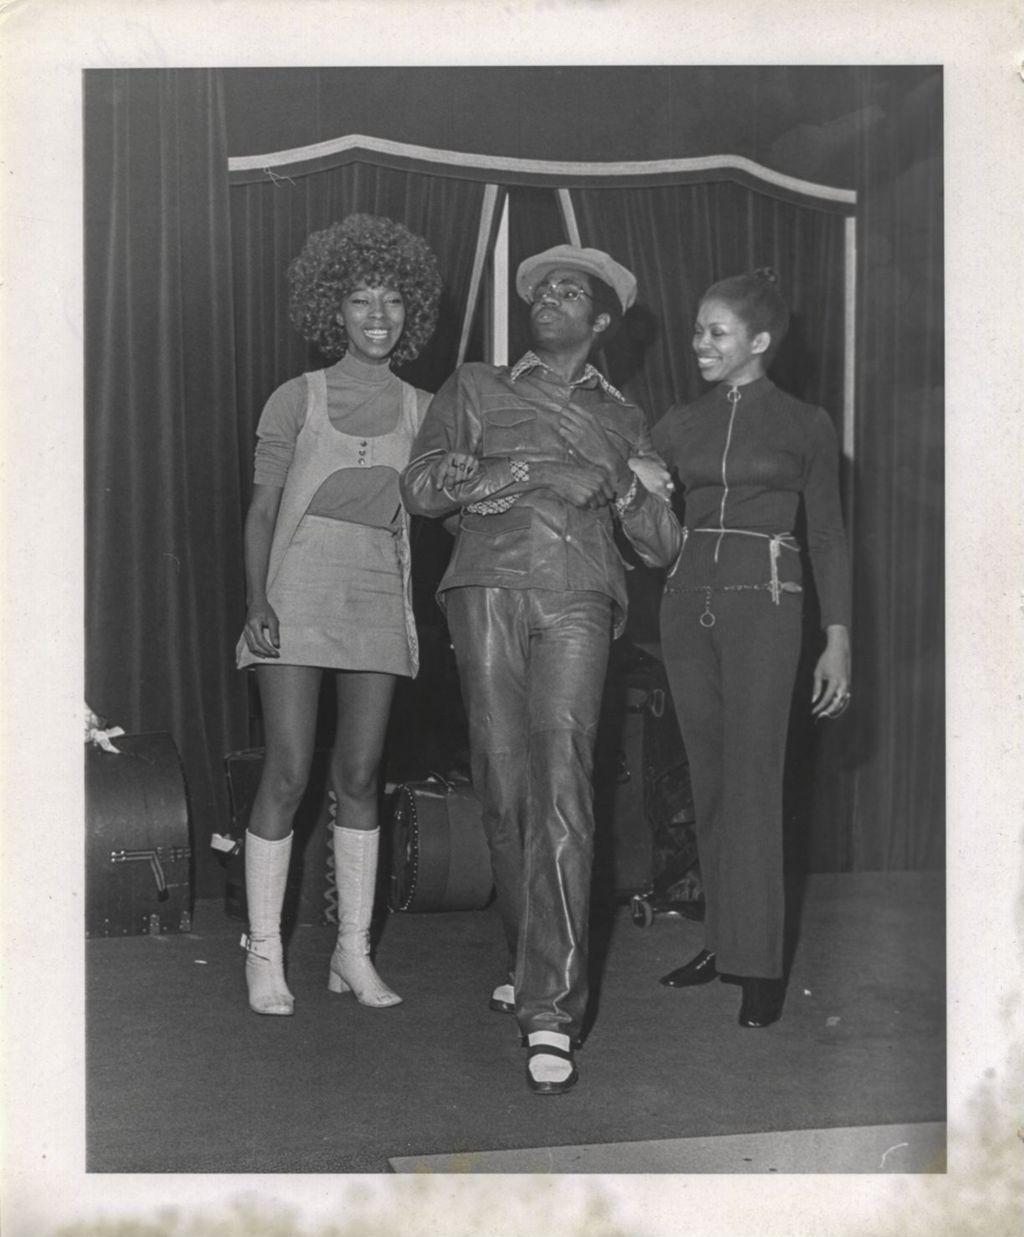 Three people modeling fashions at a "We Care" event